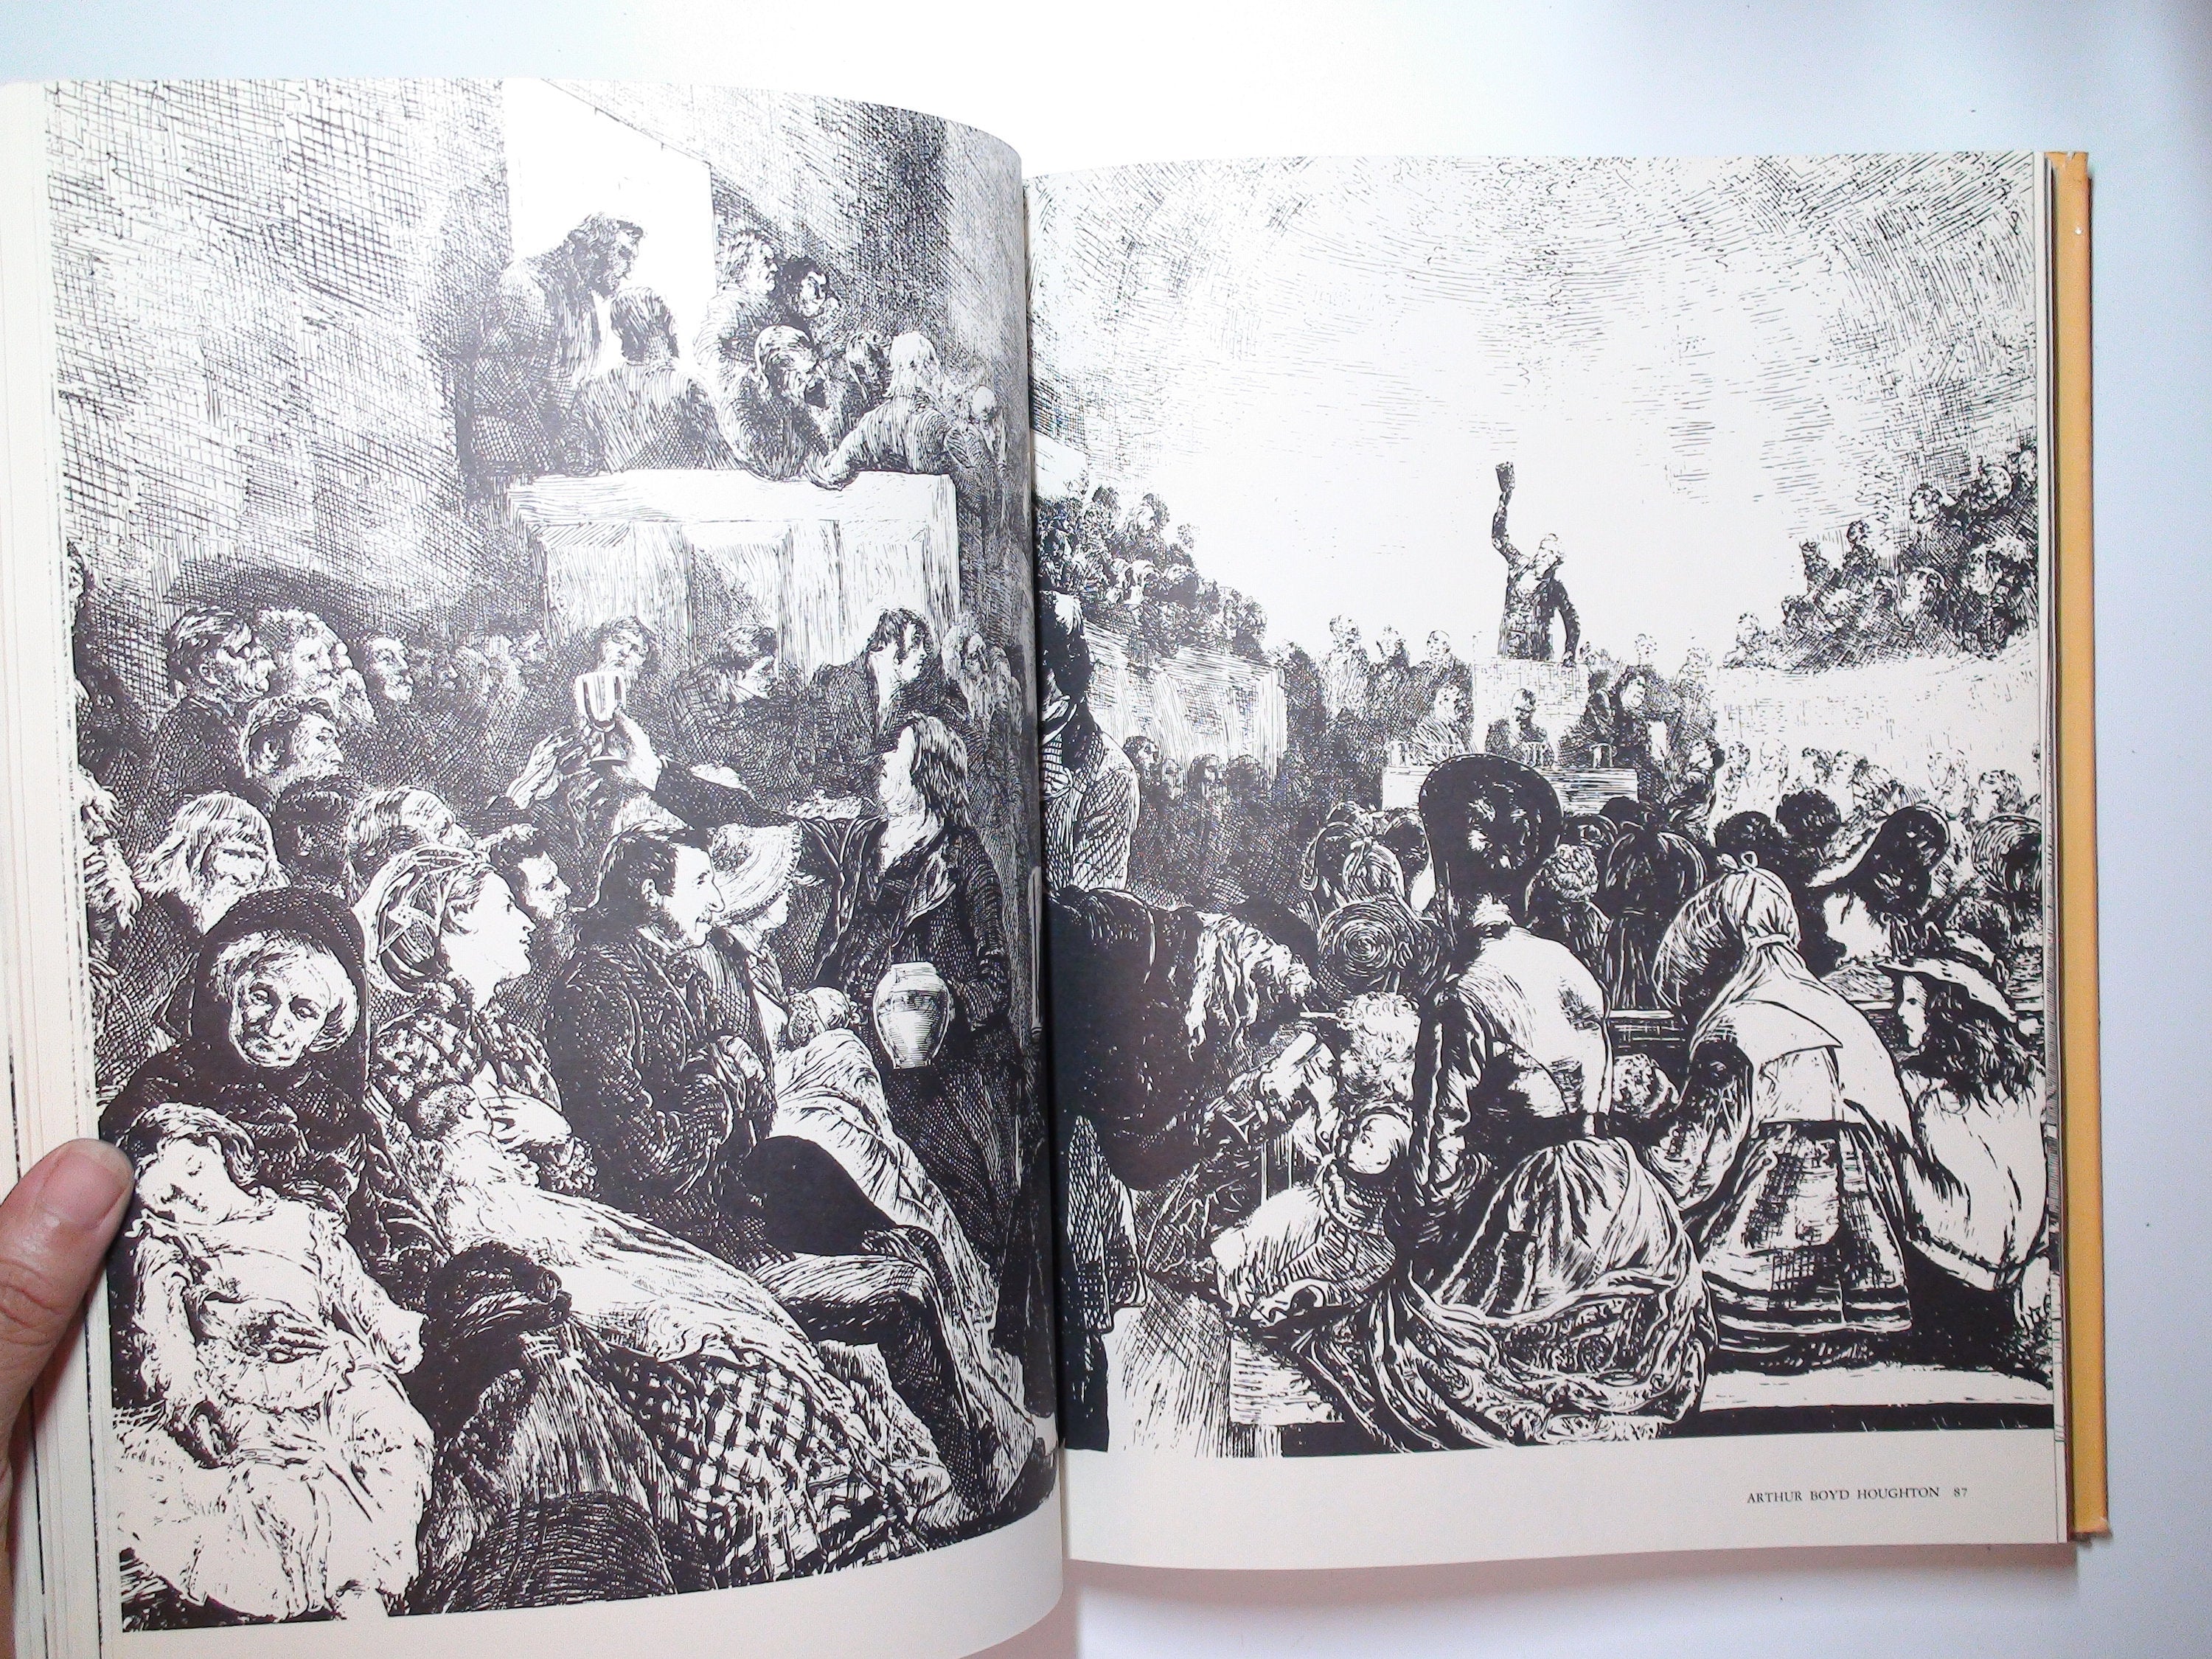 Artists on Horseback, The Old West in Illustrated Journalism, Paul Hogarth, 1972